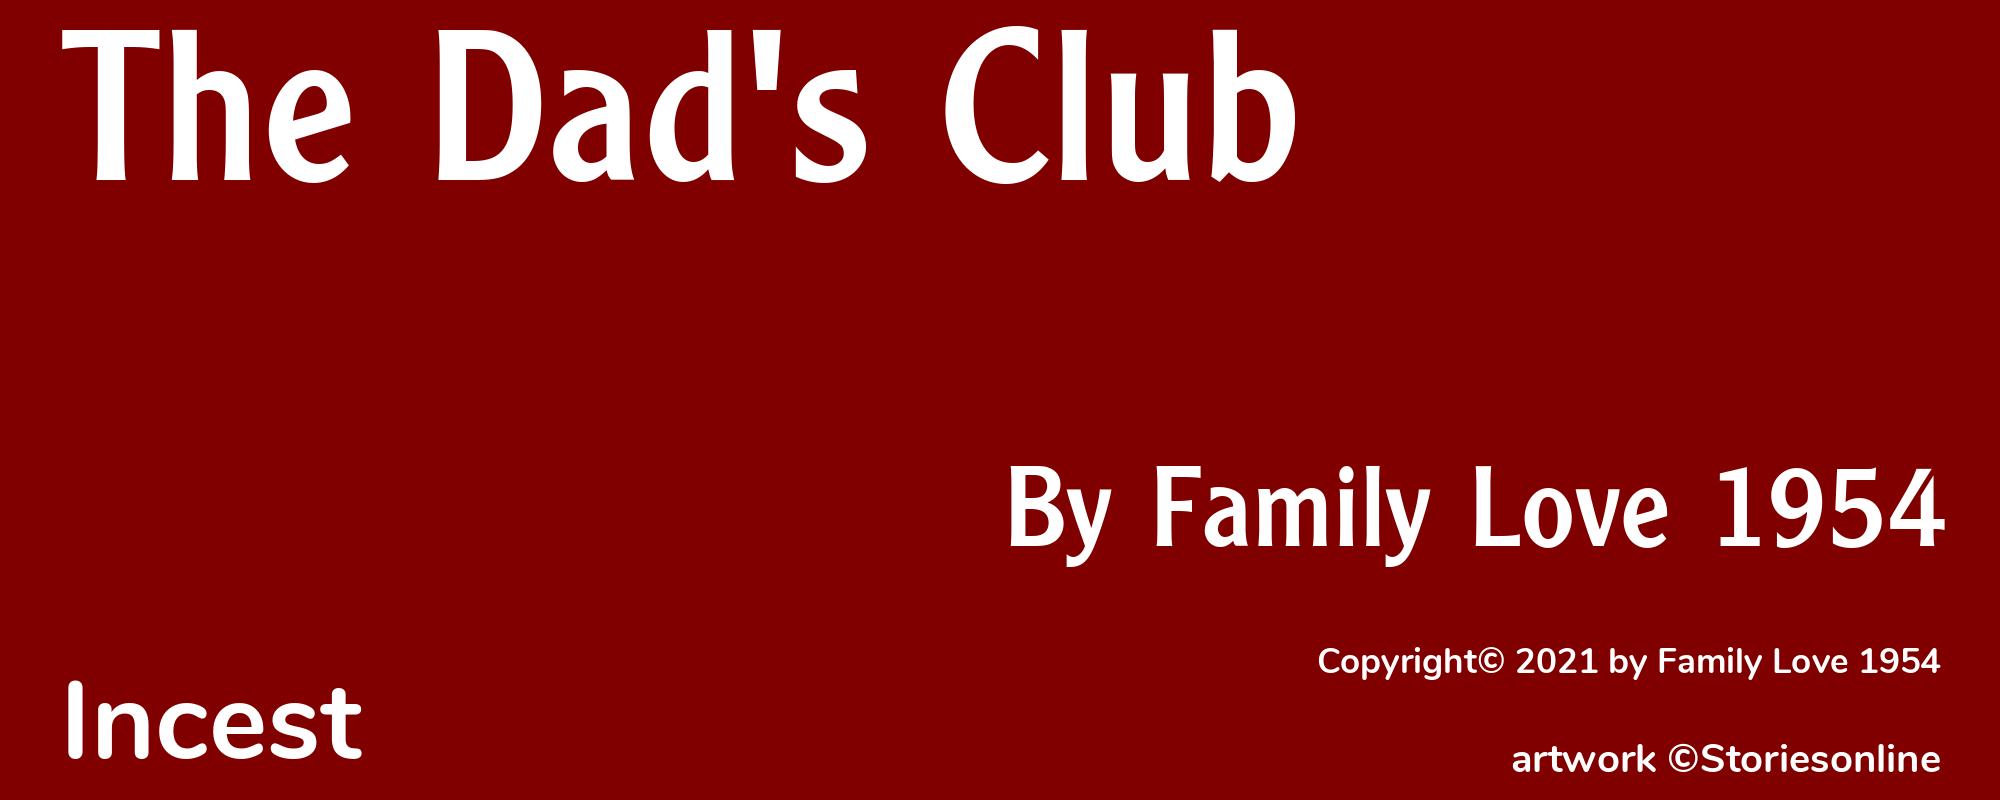 The Dad's Club - Cover